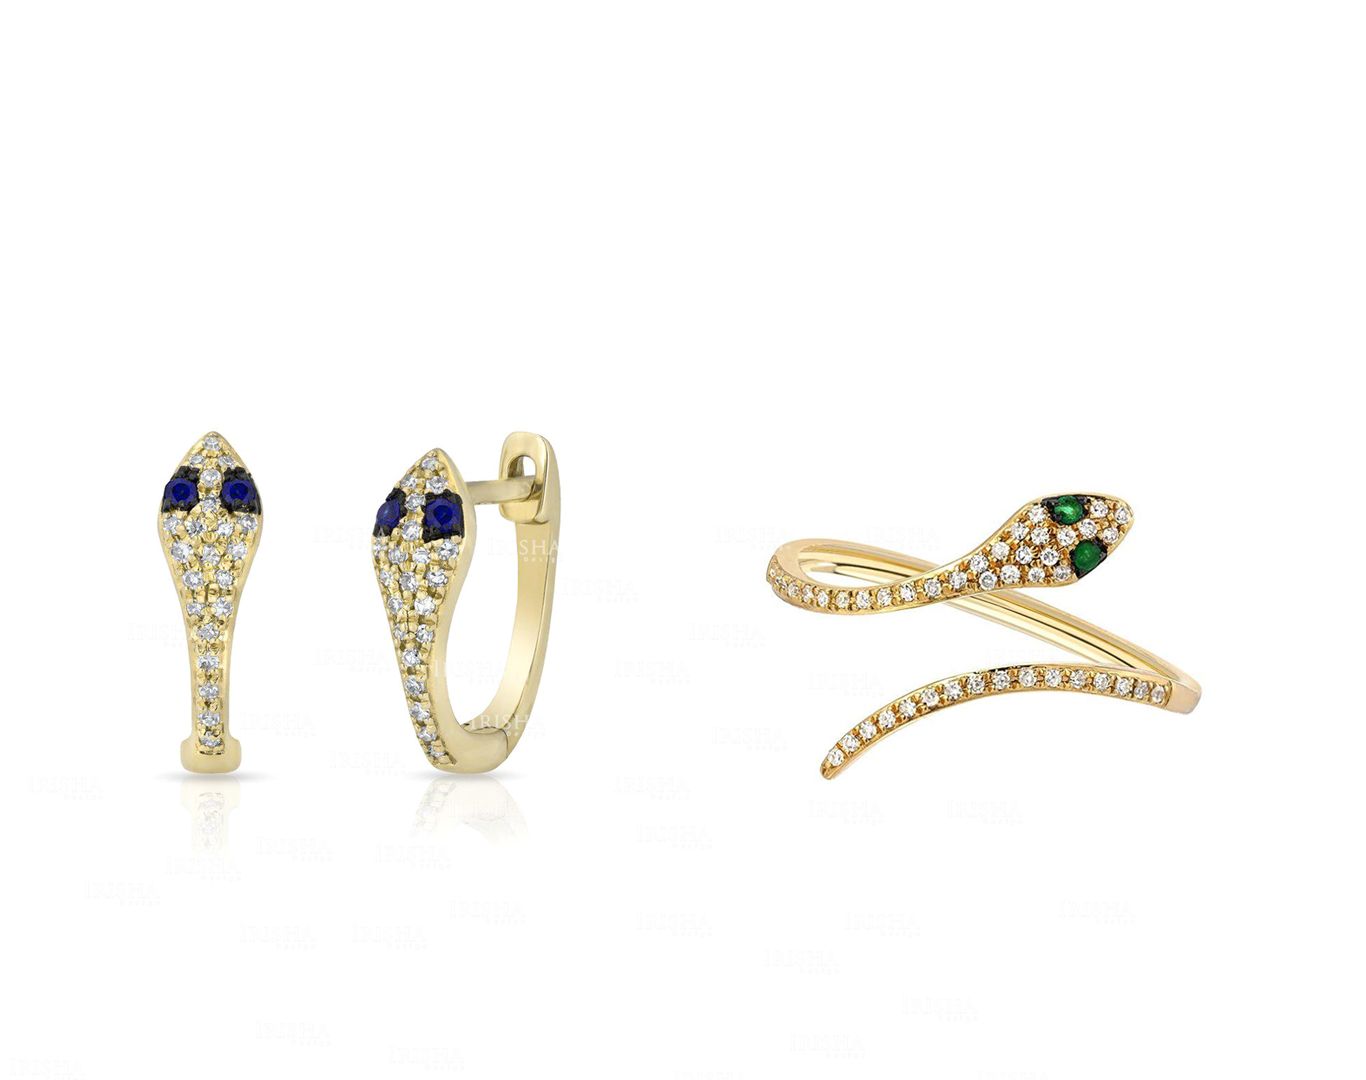 Genuine Diamond And Ruby/Emerald/Sapphire Snake Ring Earring 14K Gold Jewelry Set